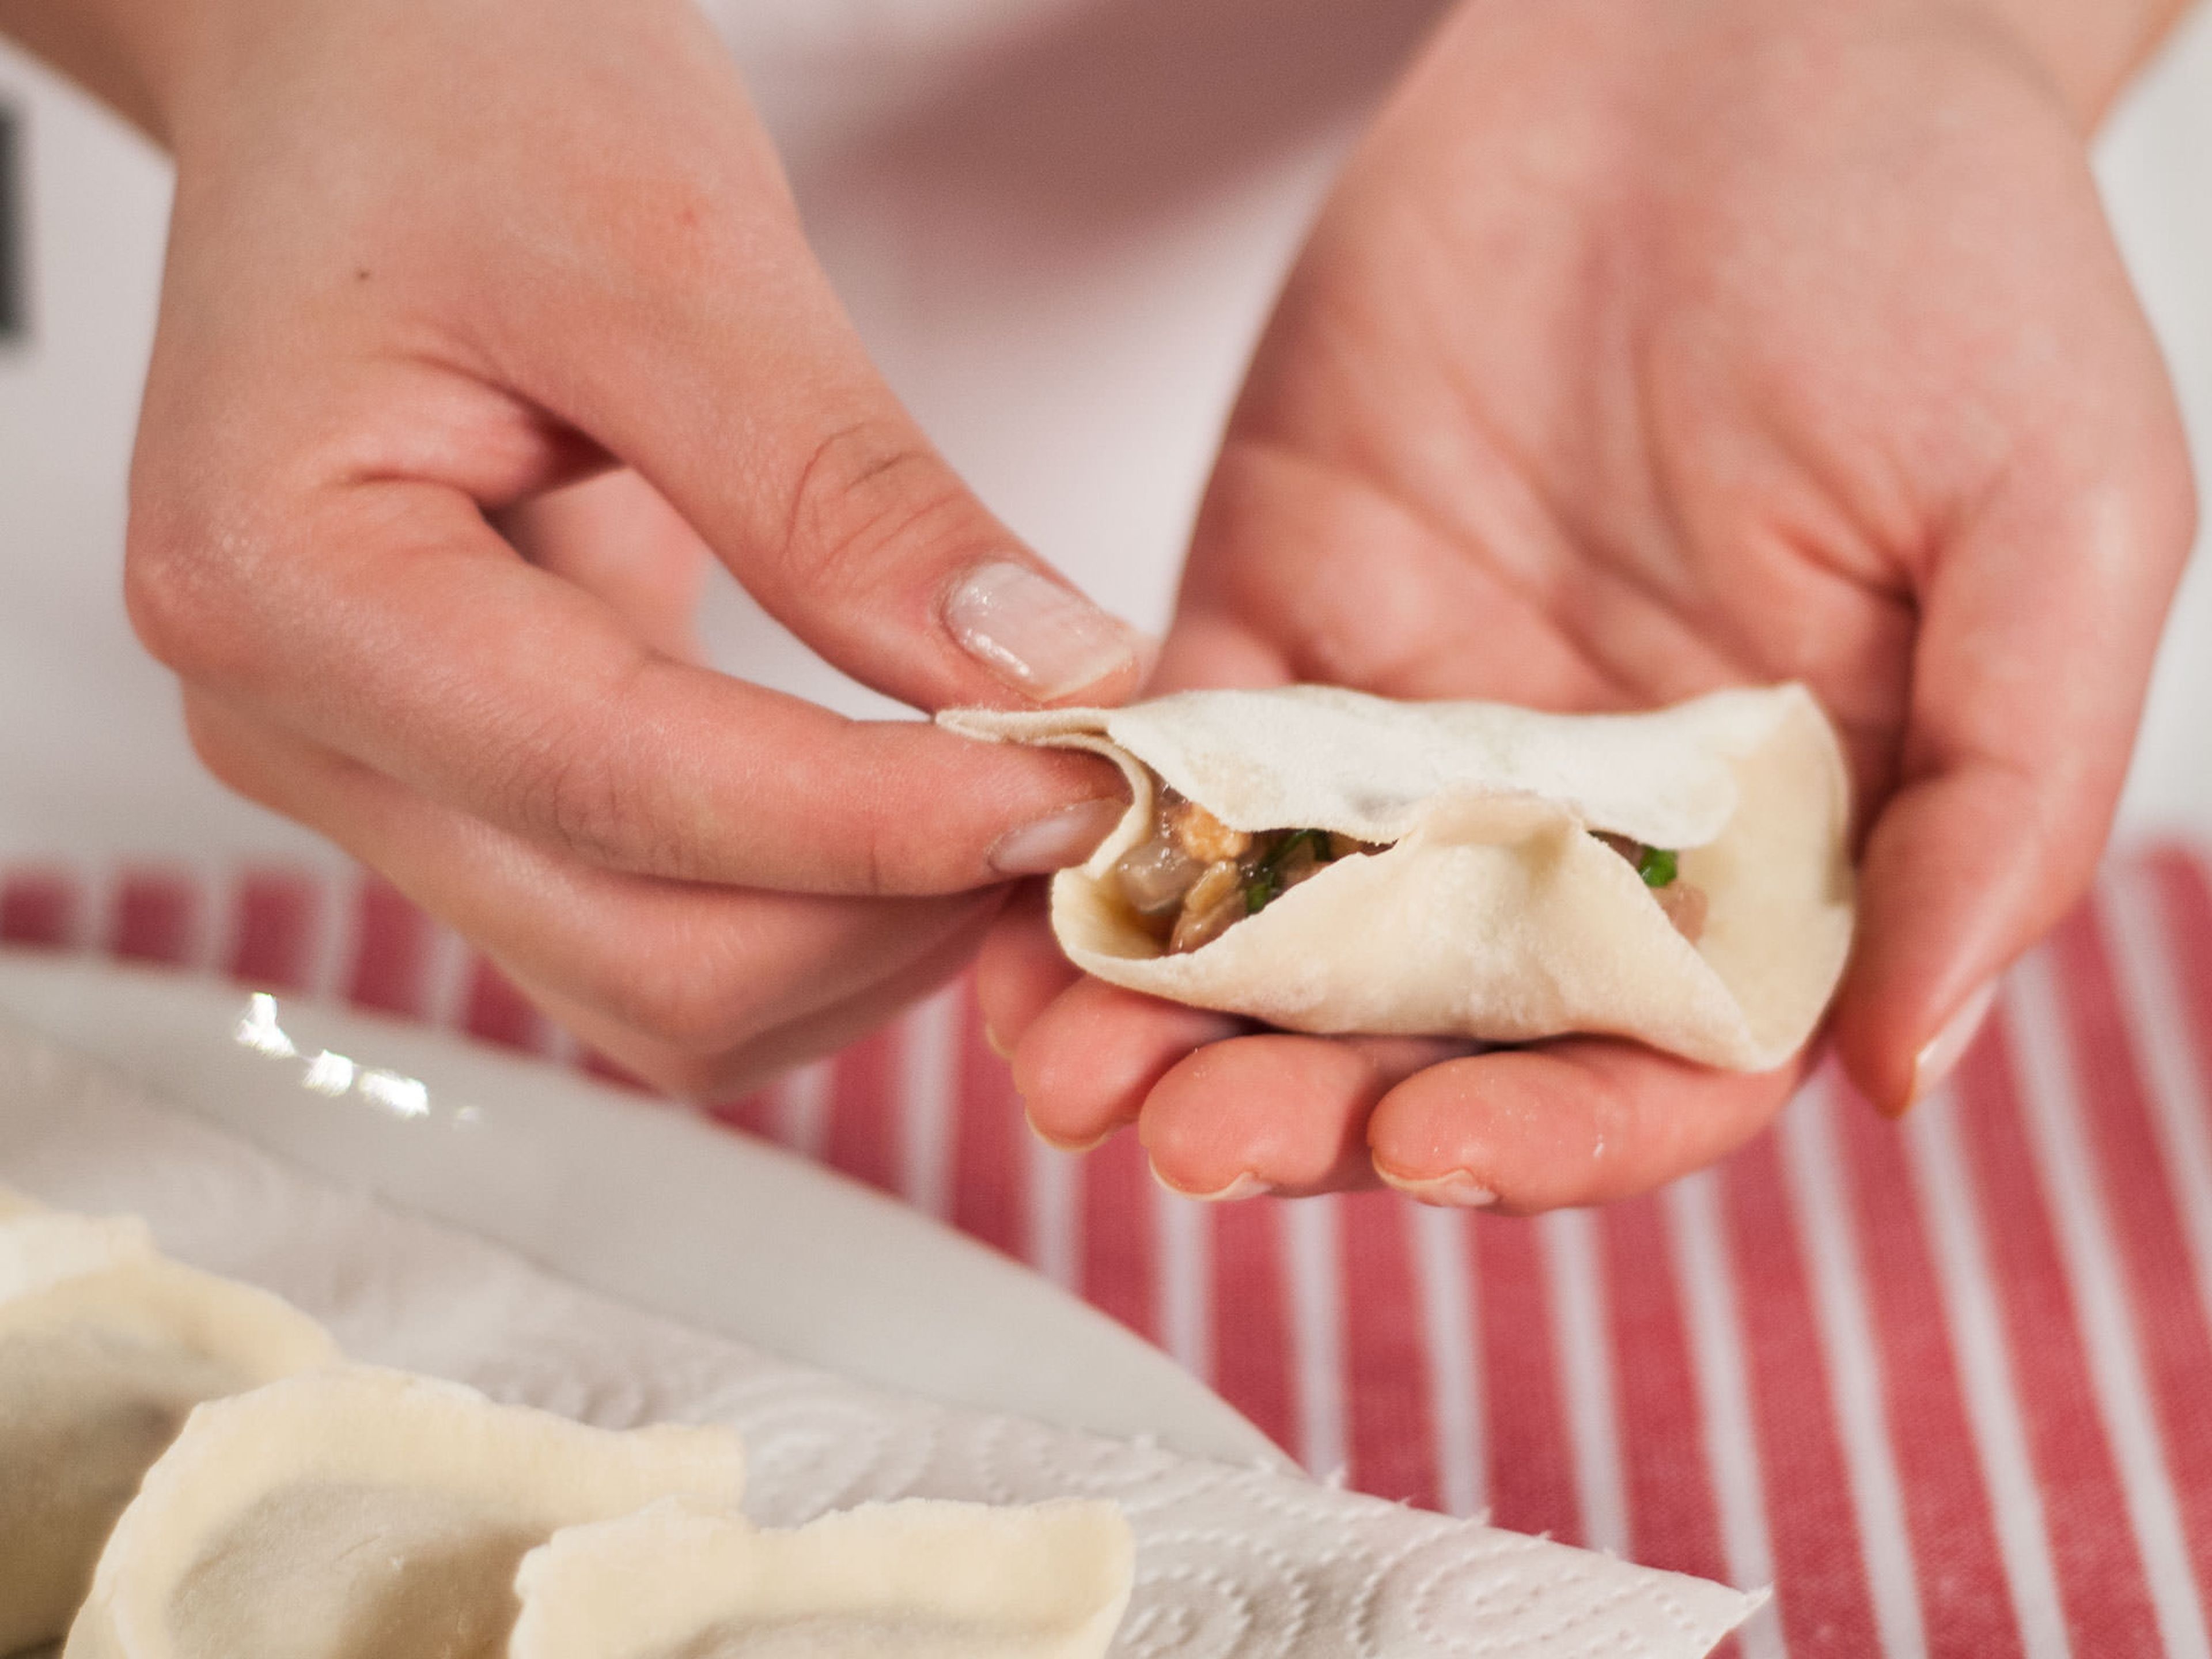 Fold over one side to form a half circle and press the center. Then, tightly seal the remaining edges while releasing any extra air. Make sure that all sides are closed firmly. Place dumplings on a plate lined with paper towel.